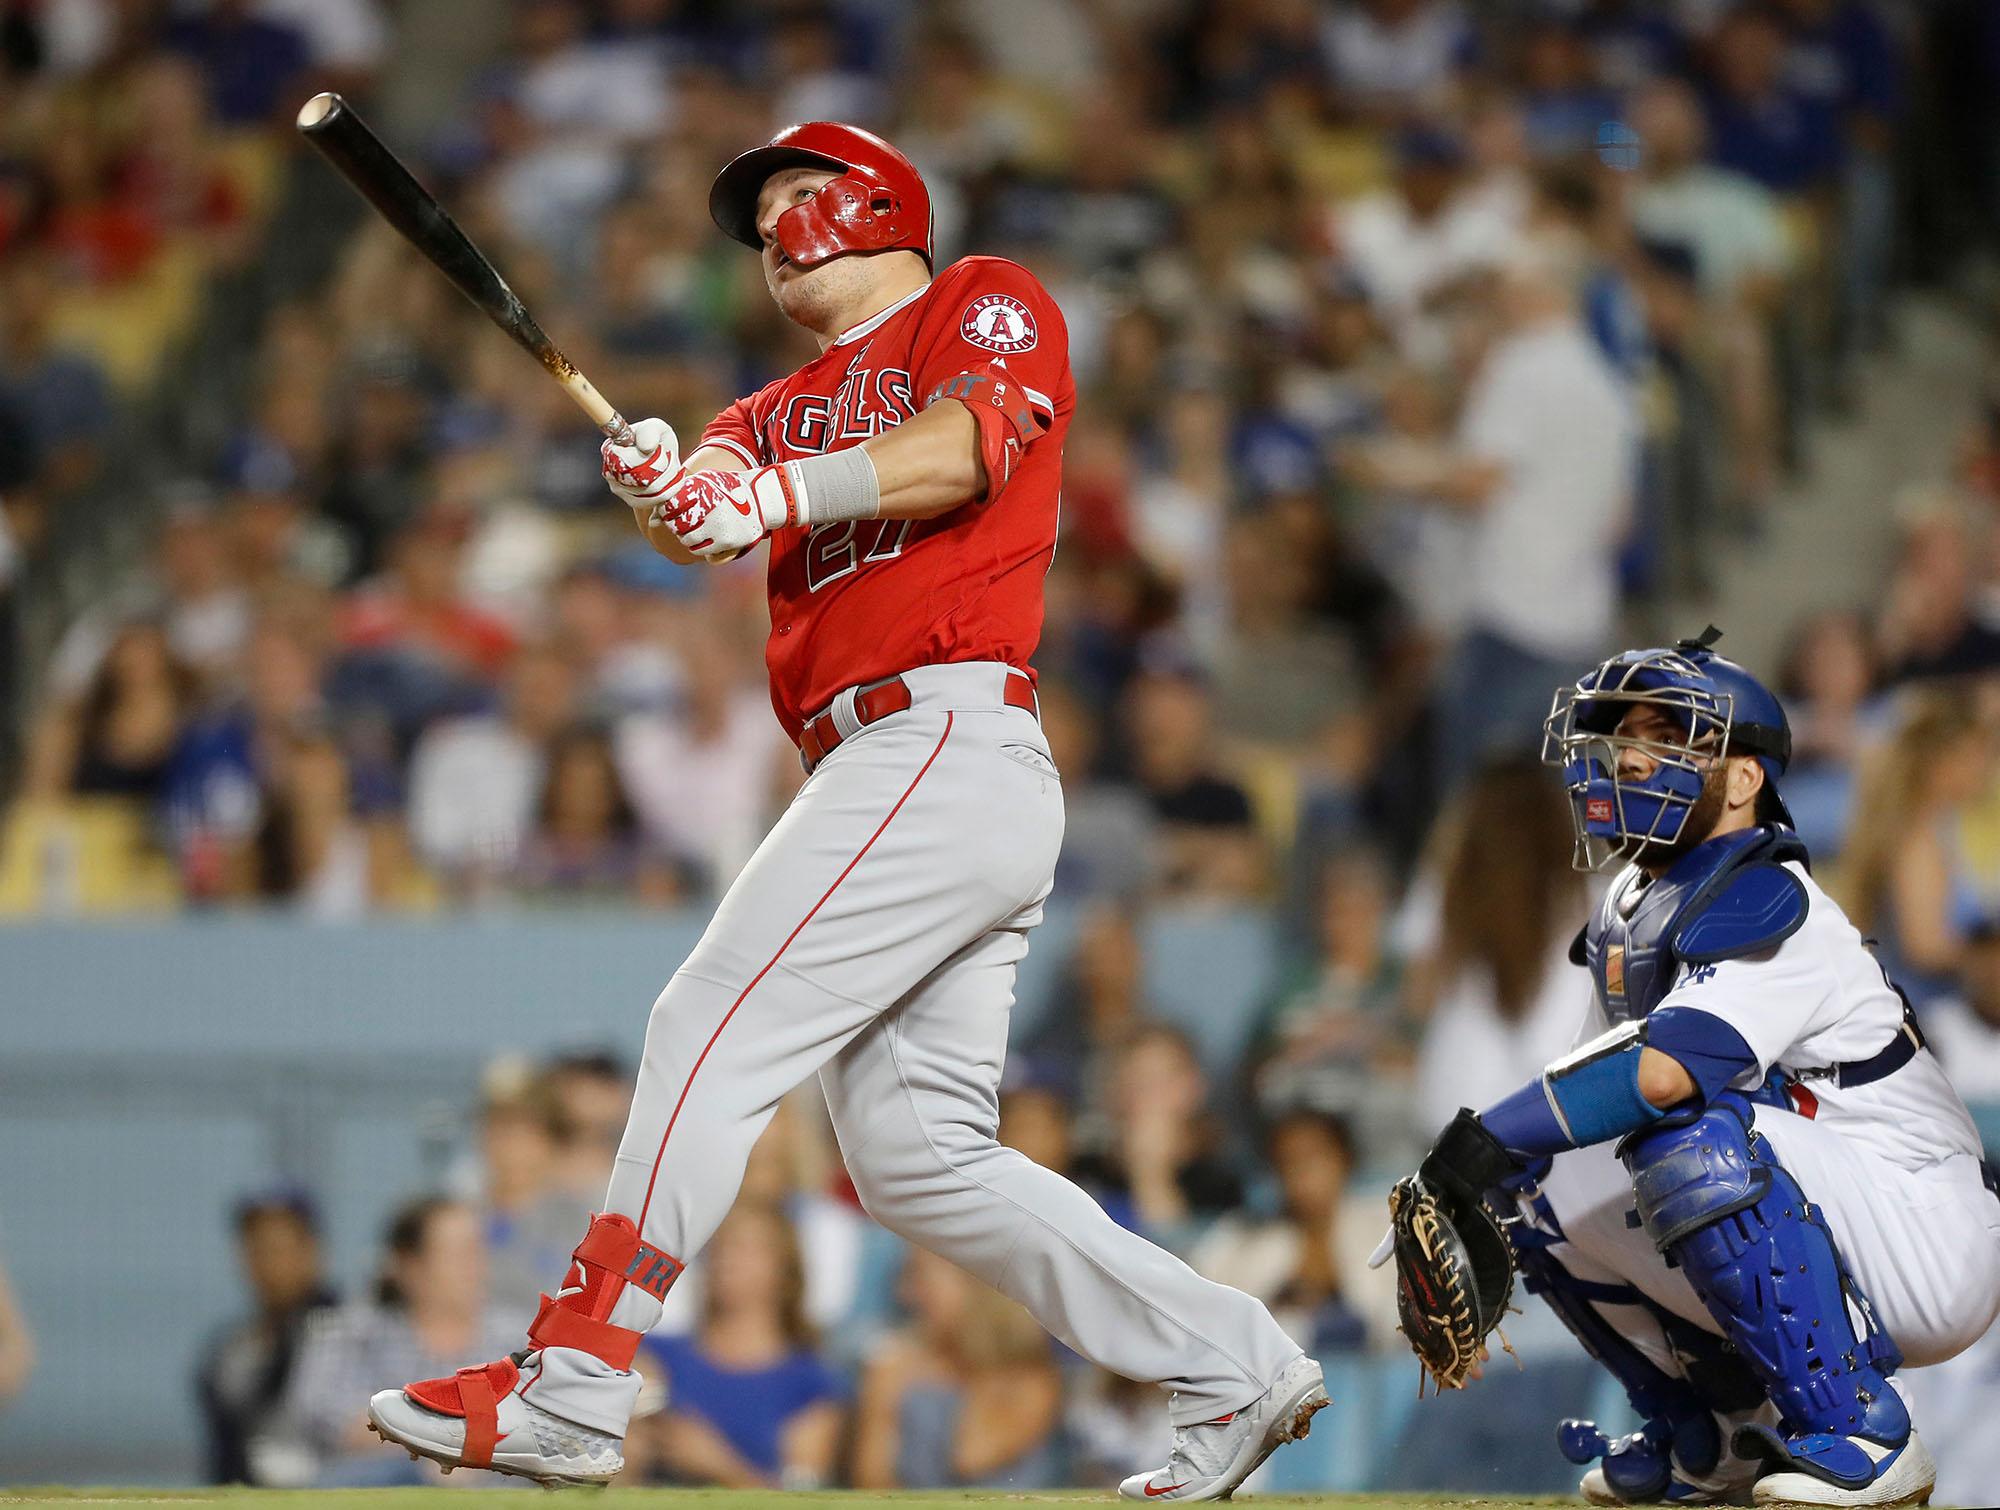 The Los Angeles Angels Mike Trout hits a solo home run against the Los Angeles Dodgers in the fifth inning on Tuesday, July 23, 2019, at Dodger Stadium in Los Angeles. (Luis Sinco/Los Angeles Times/TNS)